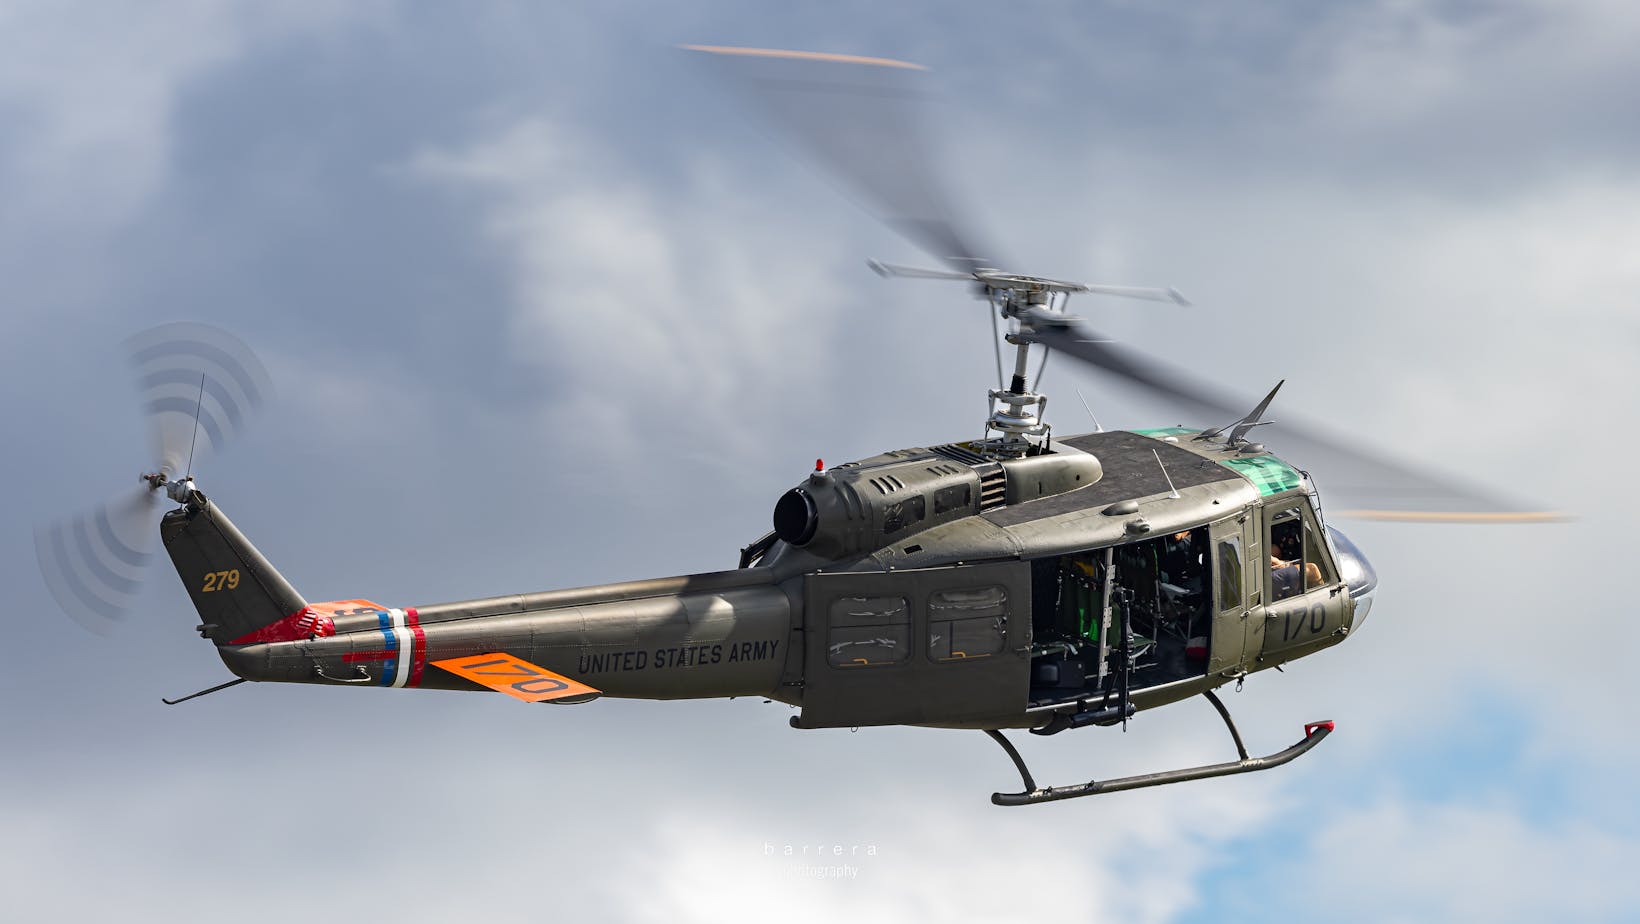 pixel 3xl helicopters backgrounds